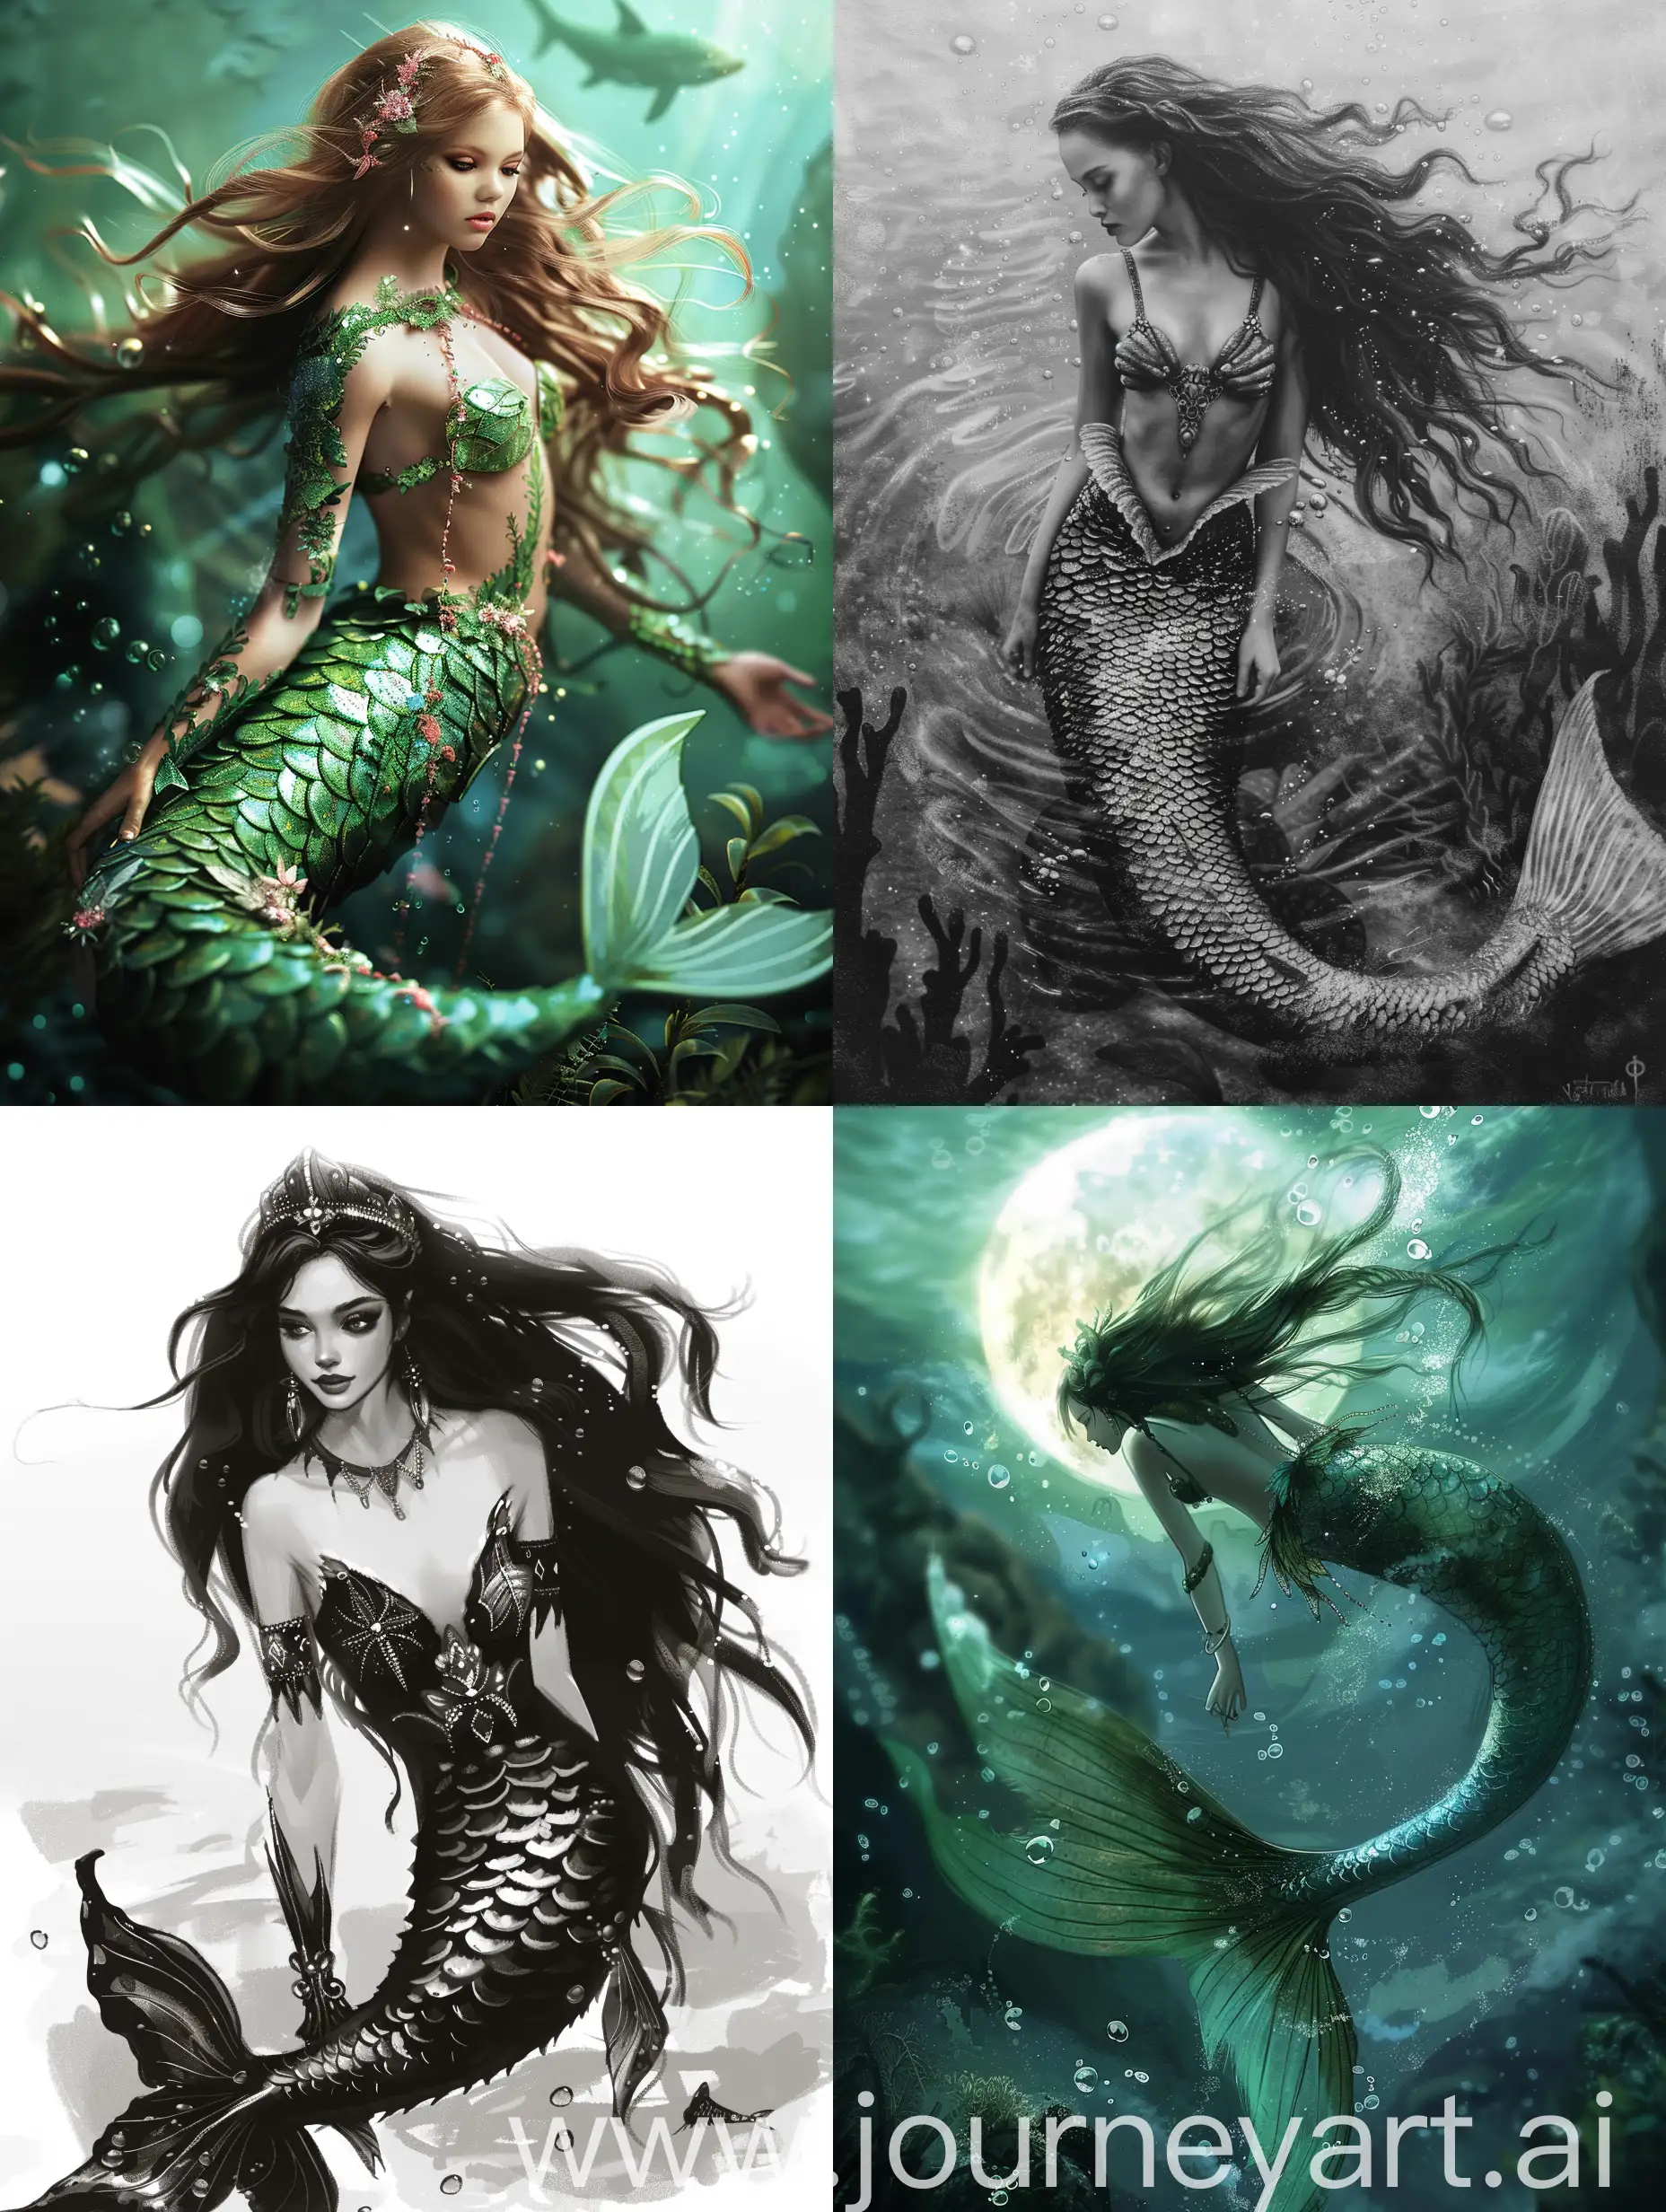 give me a picture of a mermaid full body